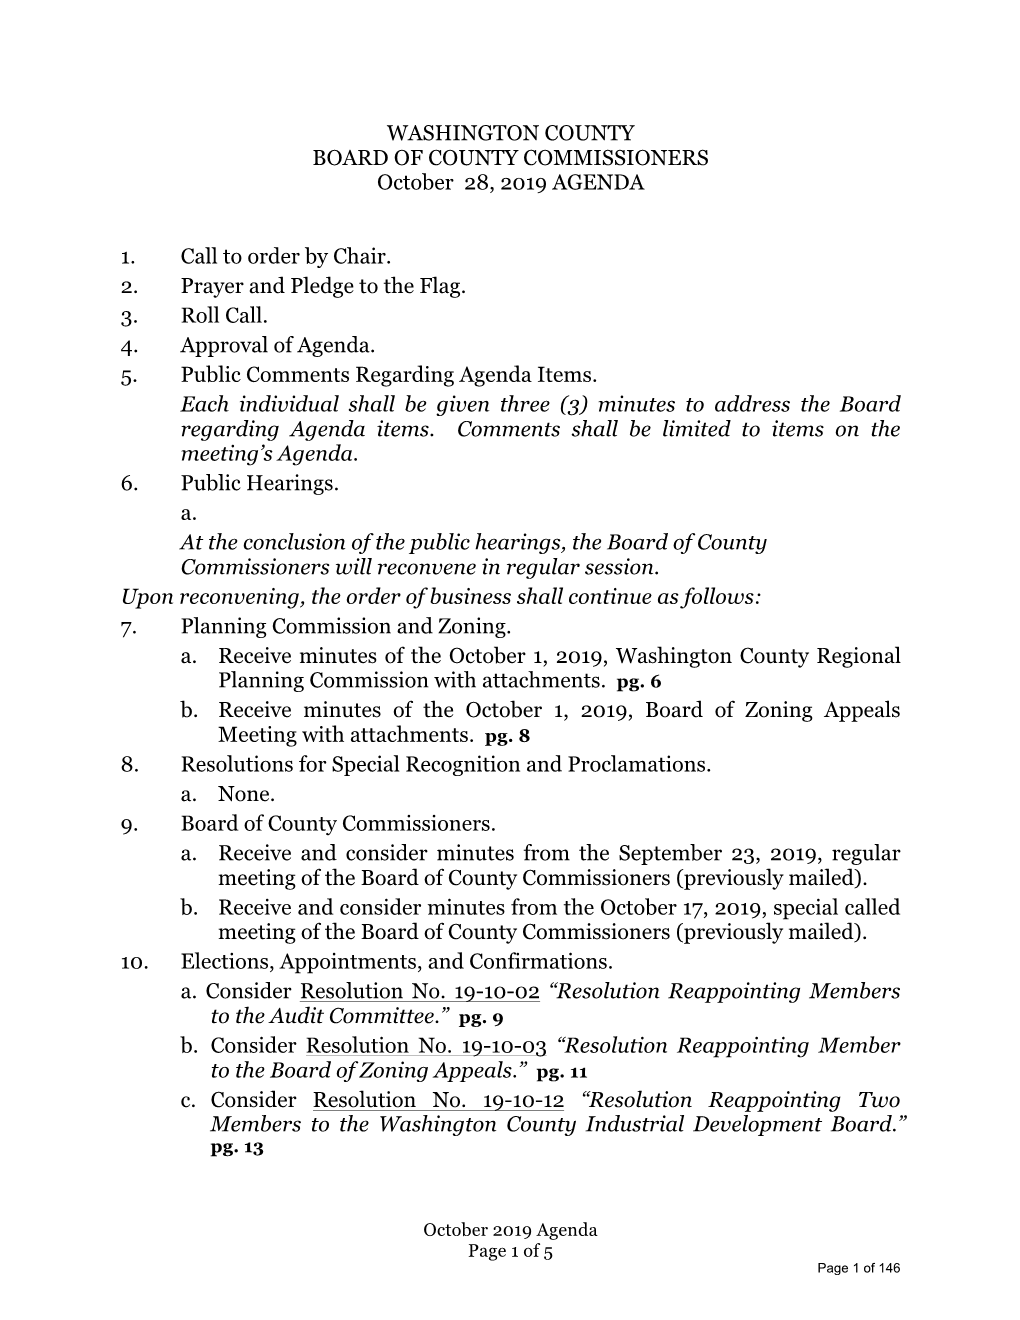 WASHINGTON COUNTY BOARD of COUNTY COMMISSIONERS October 28, 2019 AGENDA